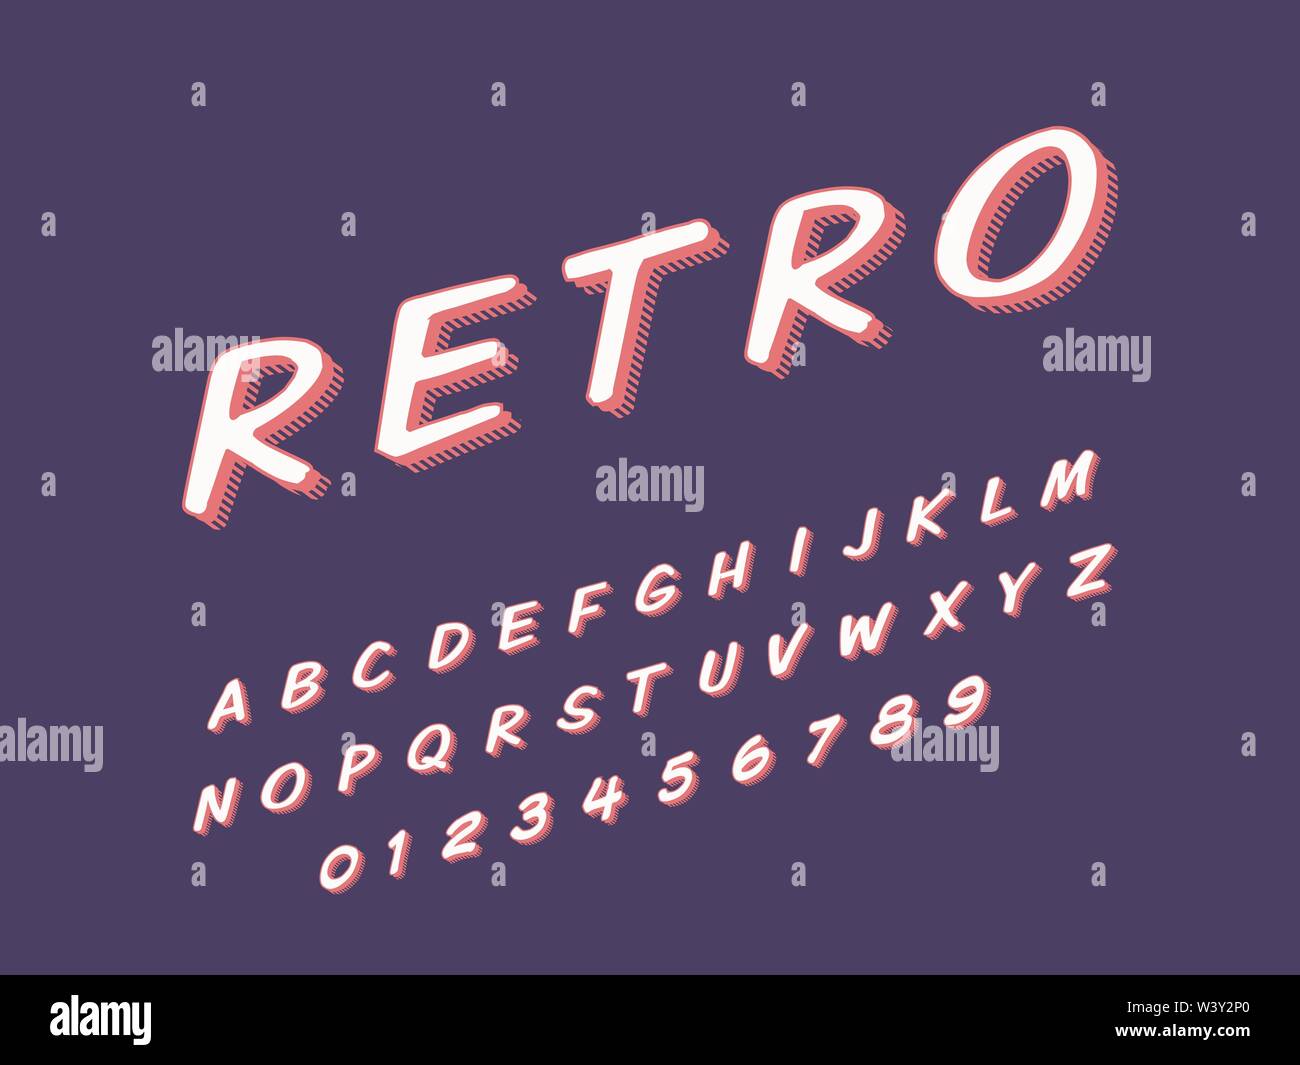 Retro font and alphabet. Stock vector illustration Stock Vector Image ...